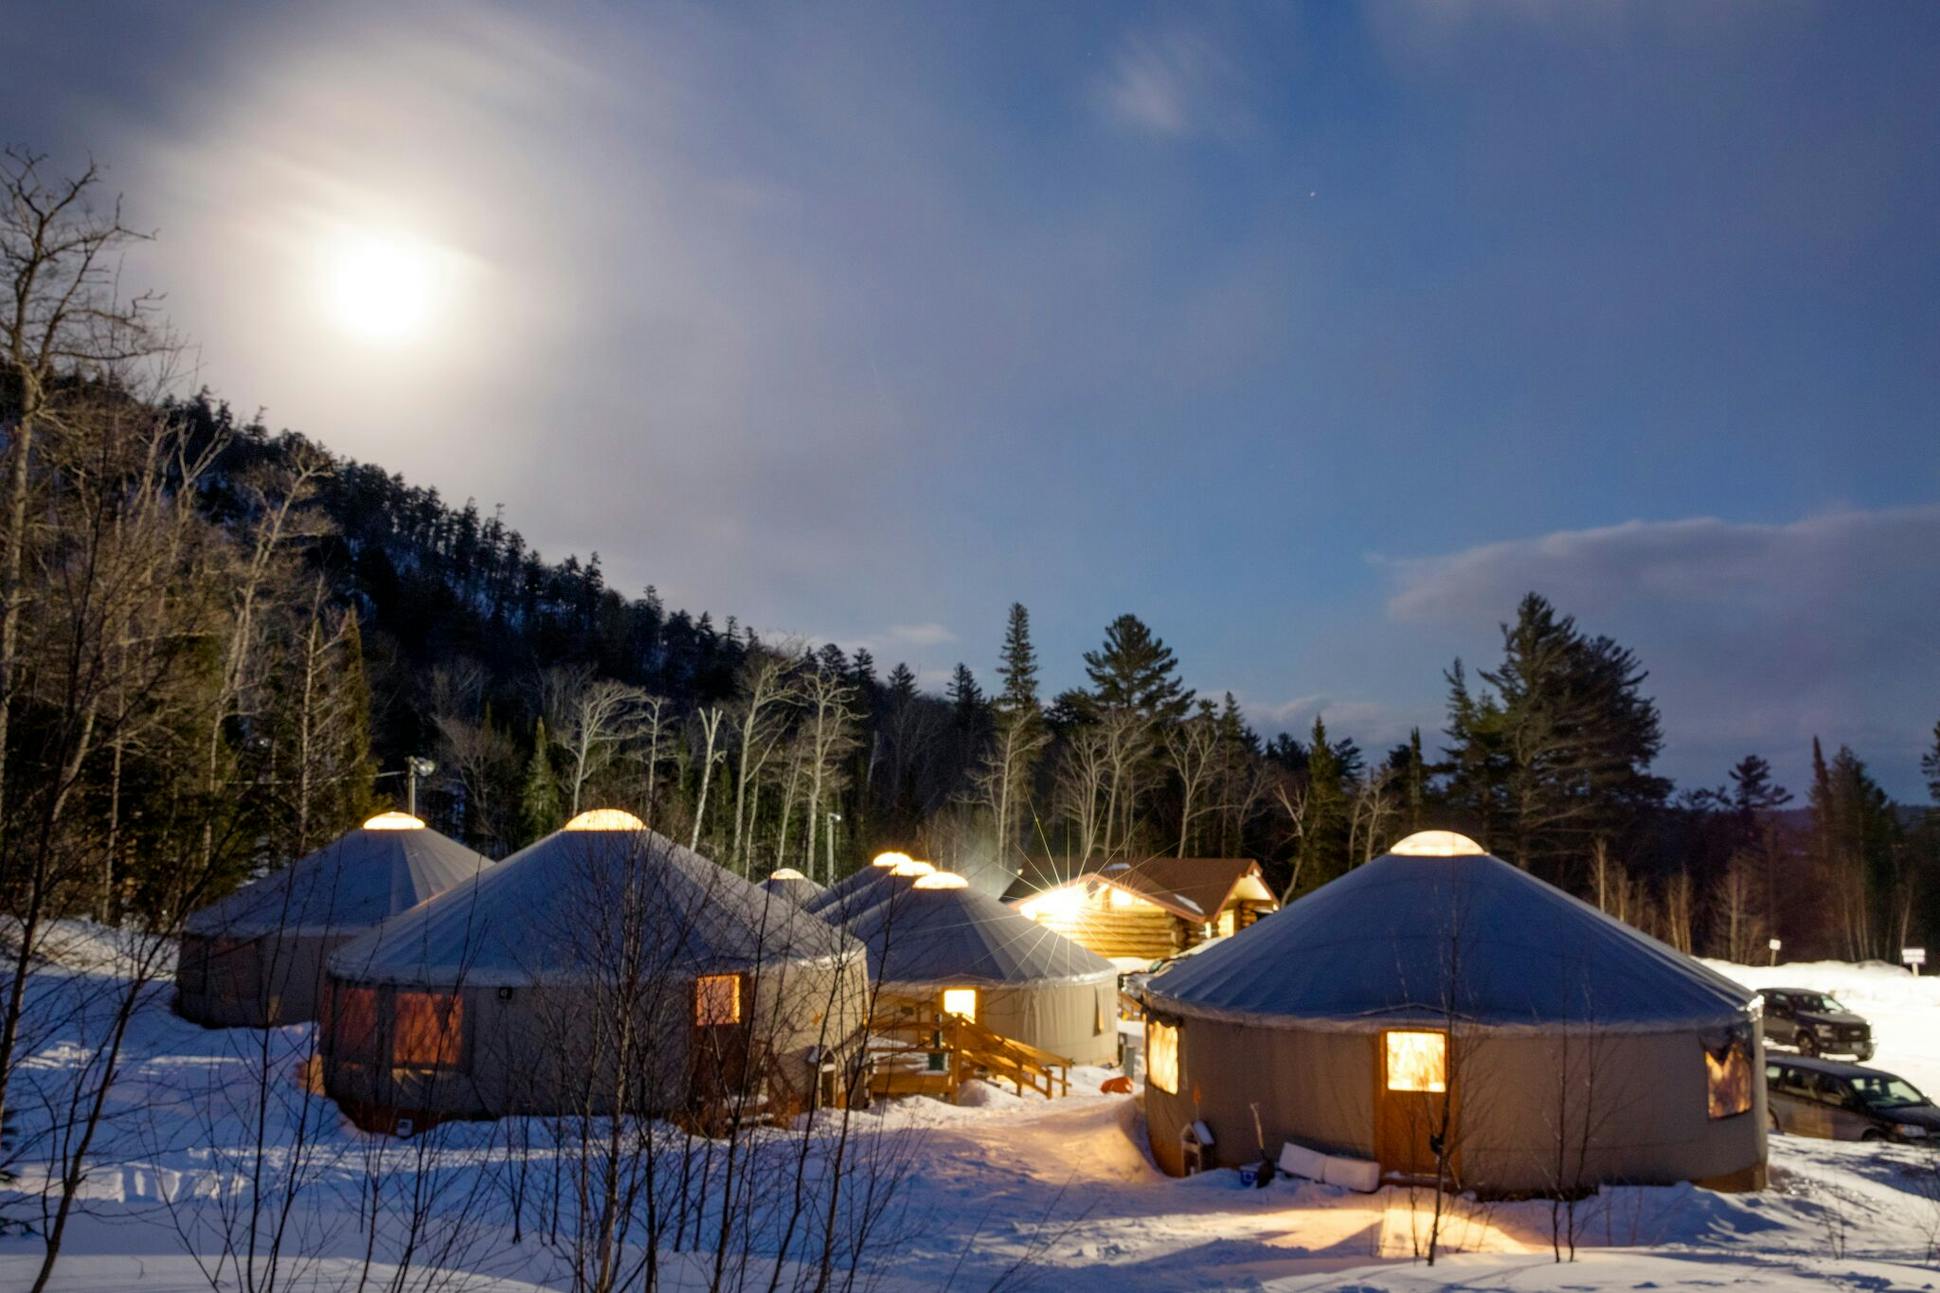 Several yurts adjacent at Mount Bohemia provide lodging, a small grill, a restaurant and retail.